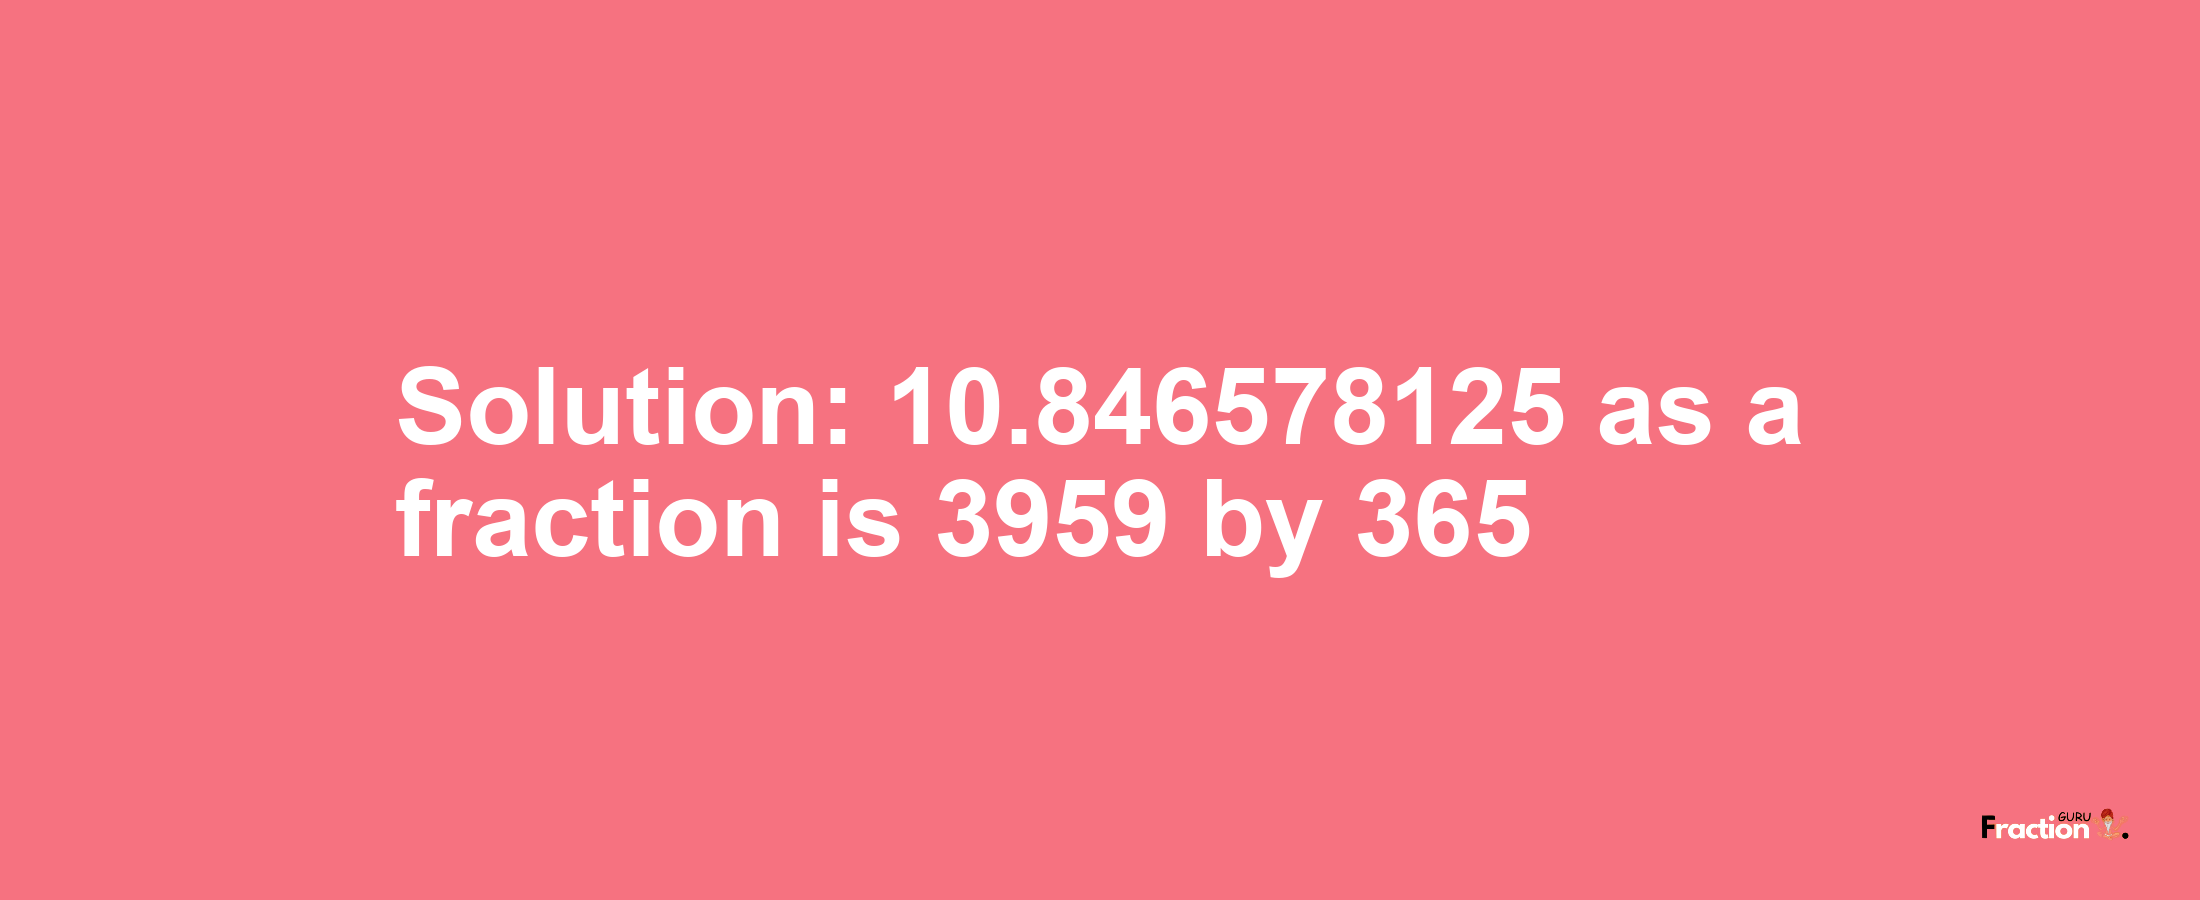 Solution:10.846578125 as a fraction is 3959/365